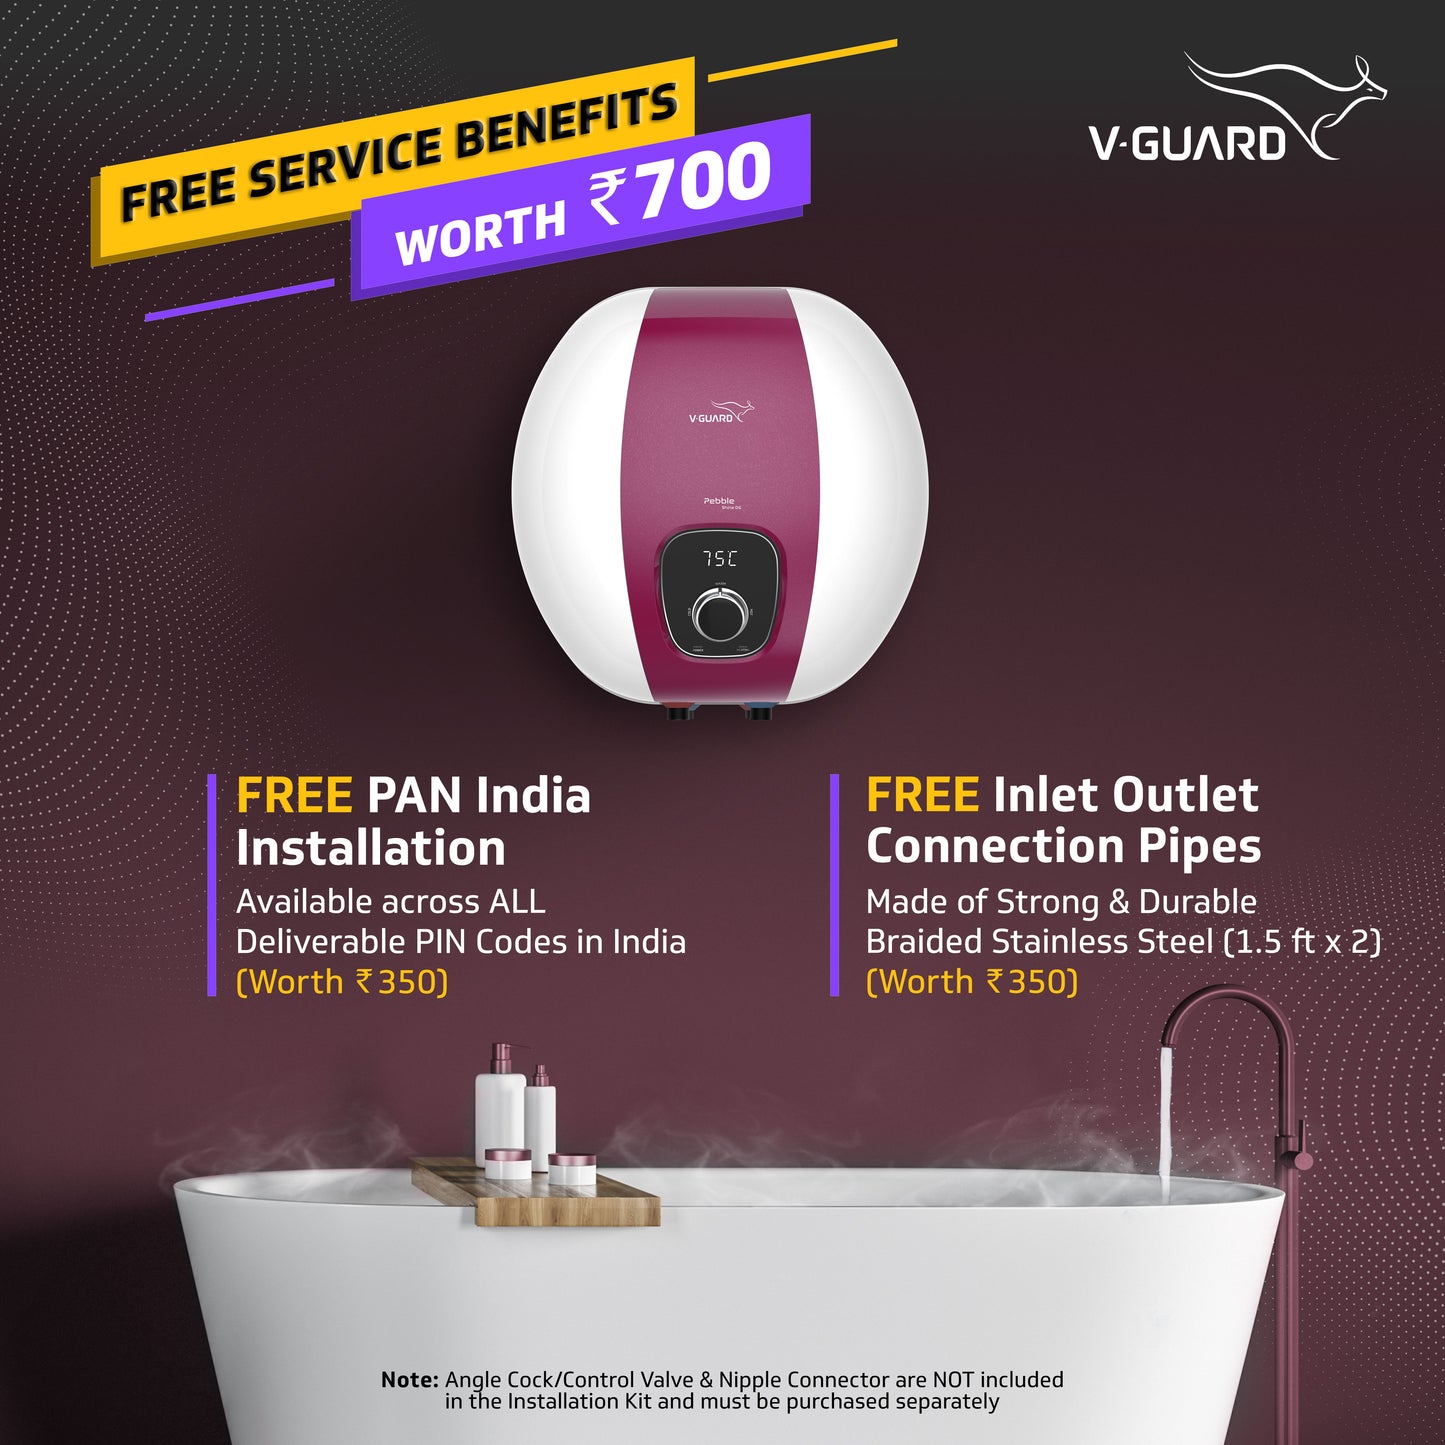 V-Guard Pebble Shine DG 15 Litre Water Heater Geyser with Digital Display | BEE 5 Star Rating | Free PAN India Installation & Connection Pipes